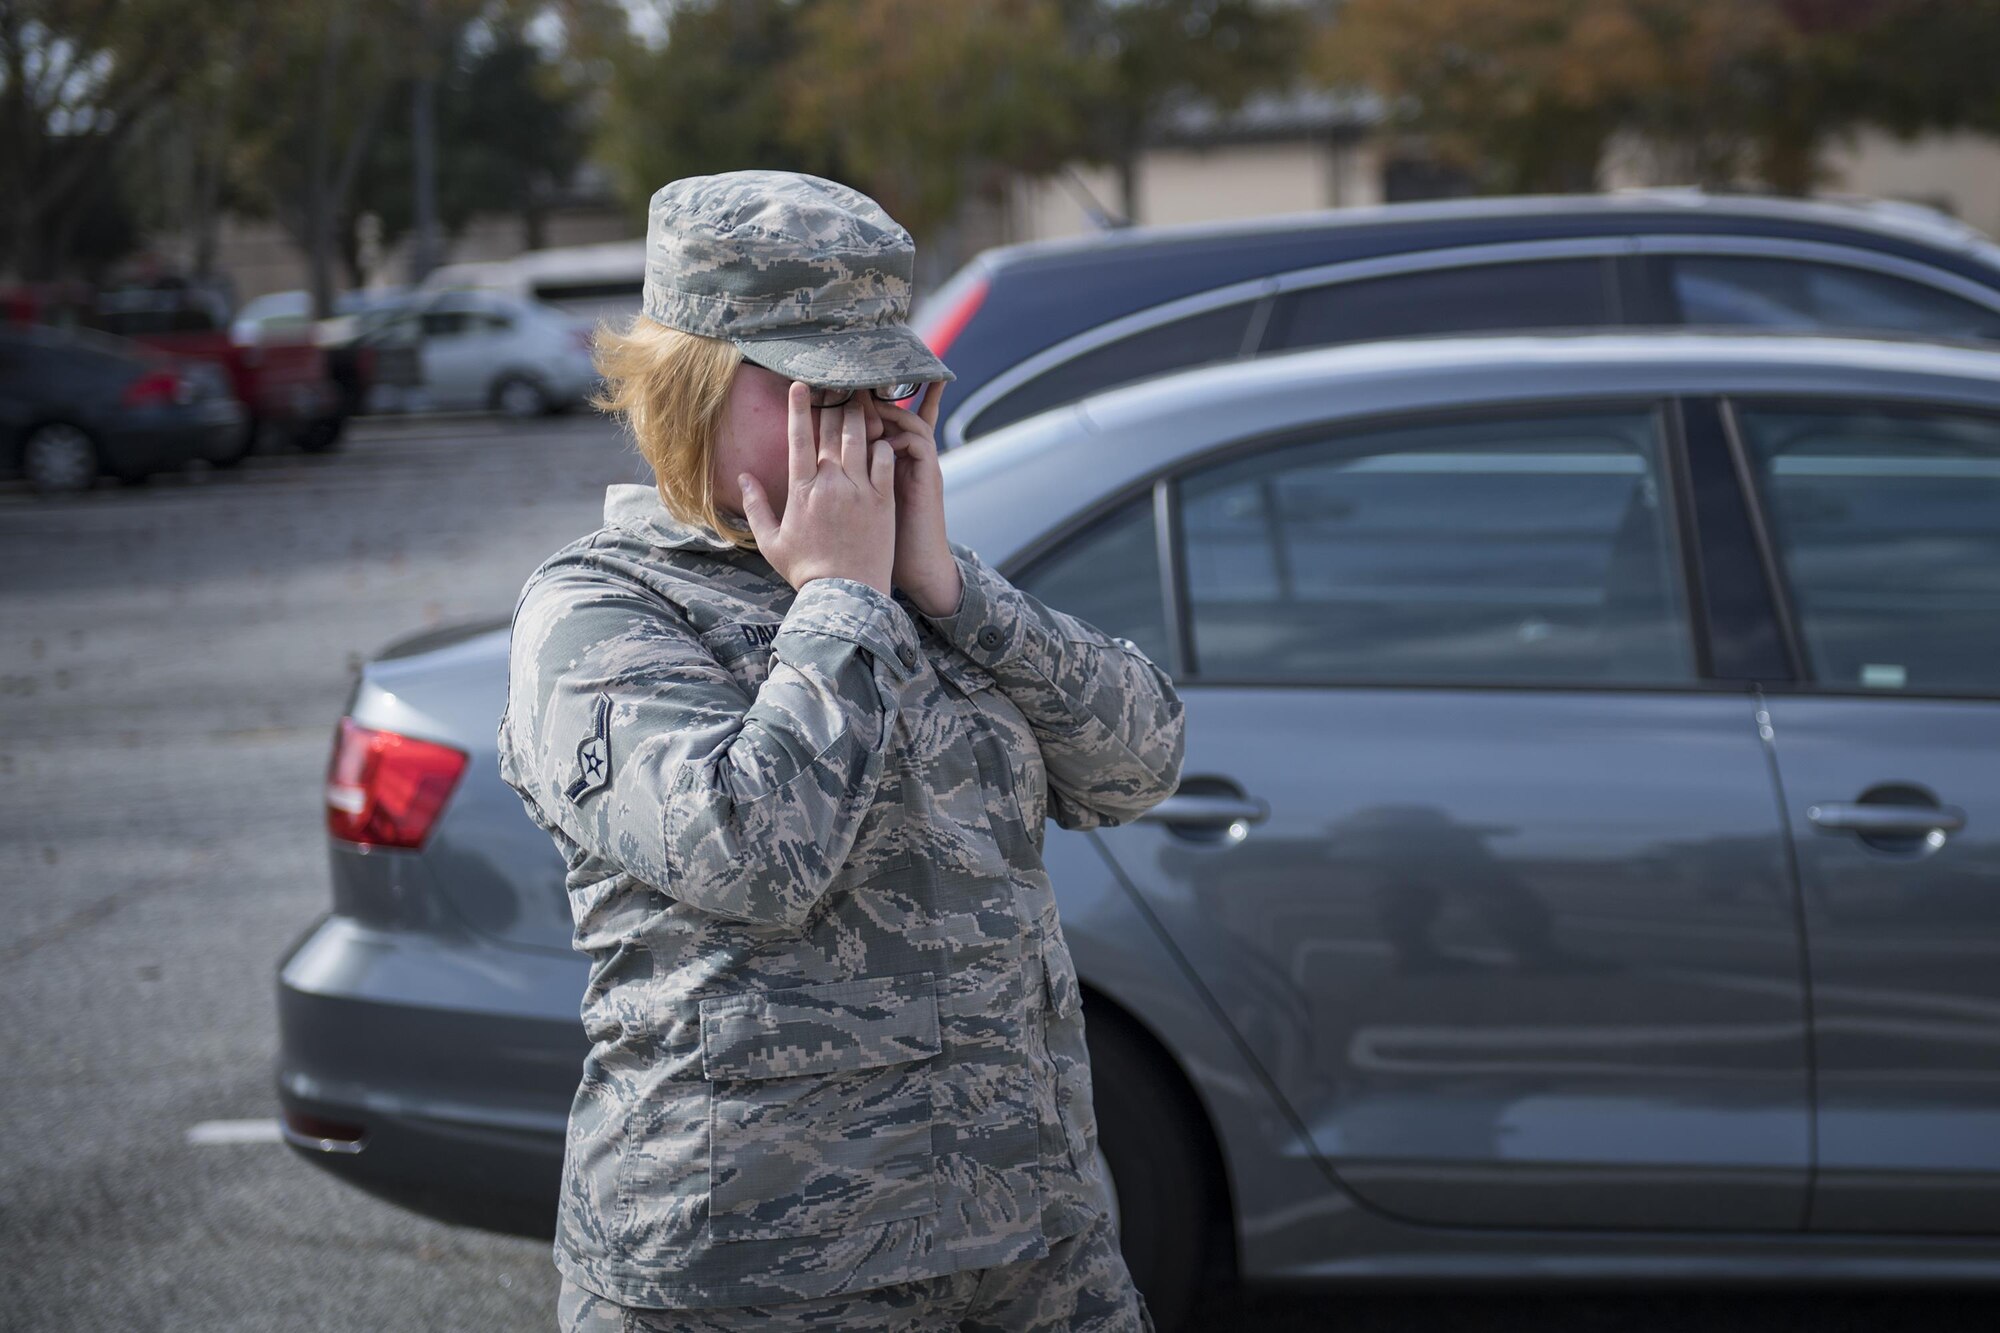 Airman Elizabeth Davis, 23d Communications Squadron knowledge management technician, wipes tears away from her eyes after greeting her sister, Nov. 30, 2016, at Moody Air Force Base, Ga. The sisters are stationed at Moody and both work in the 23d CS. Davis influenced her sister’s decision to pursue working in a communications squadron. (U.S. Air Force photo by Airman 1st Class Daniel Snider)